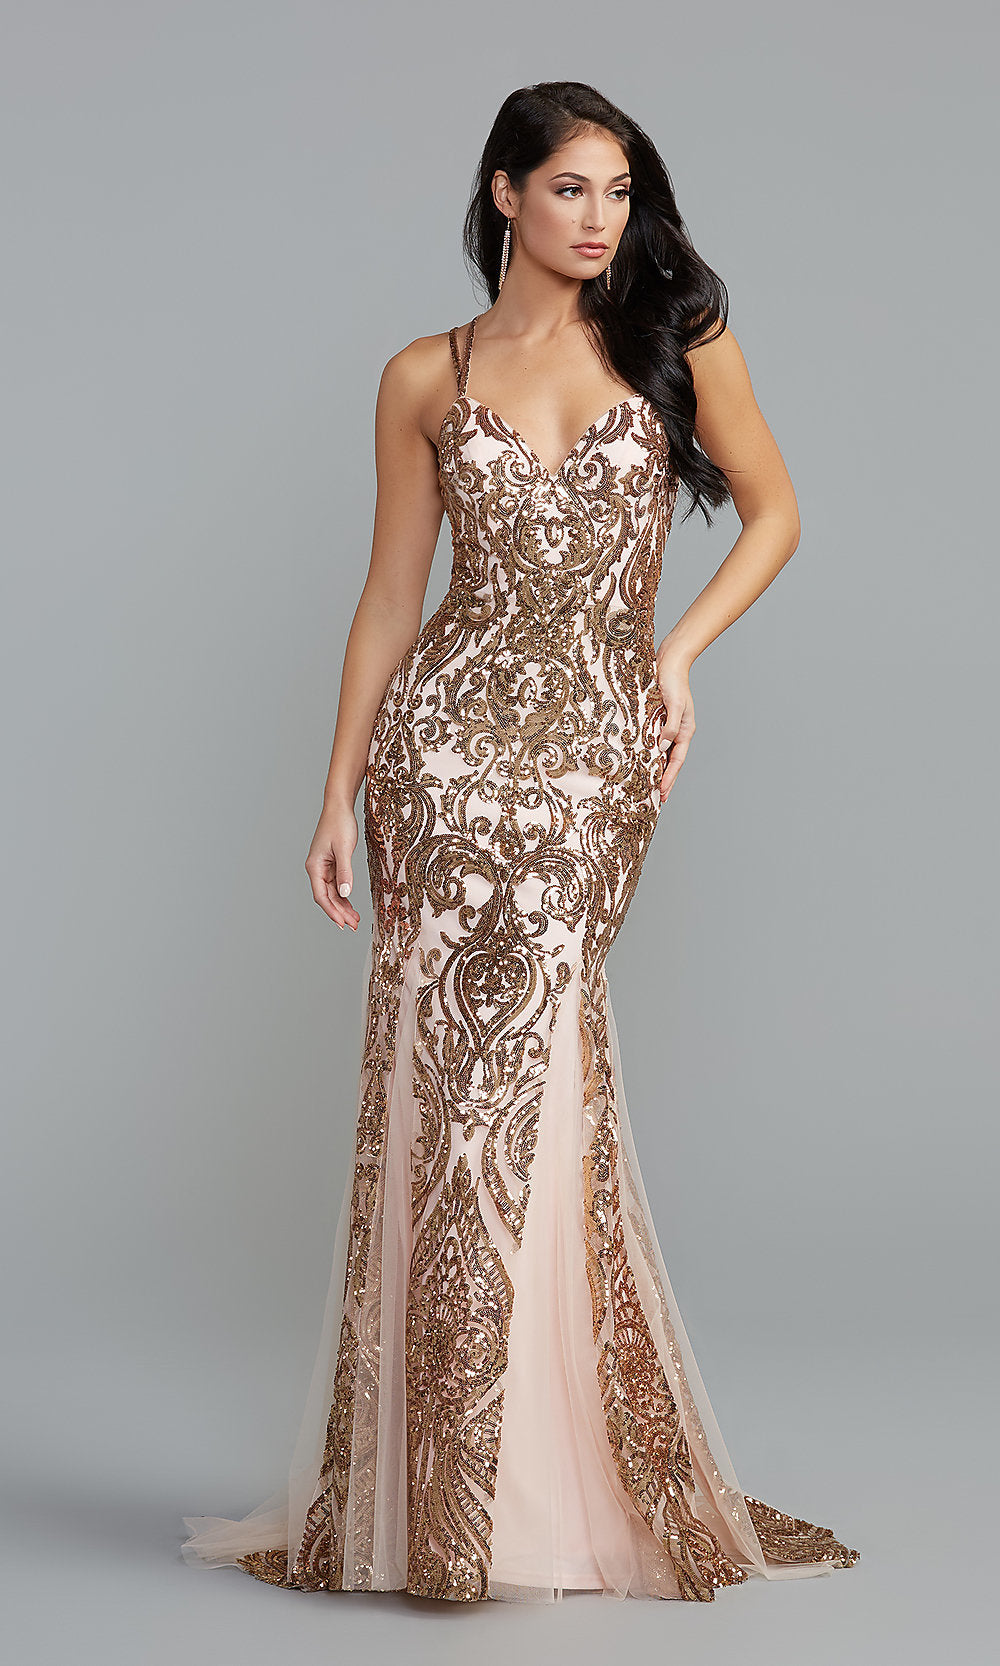 Gold Sequin-Print Long Prom Dress with Strappy Back